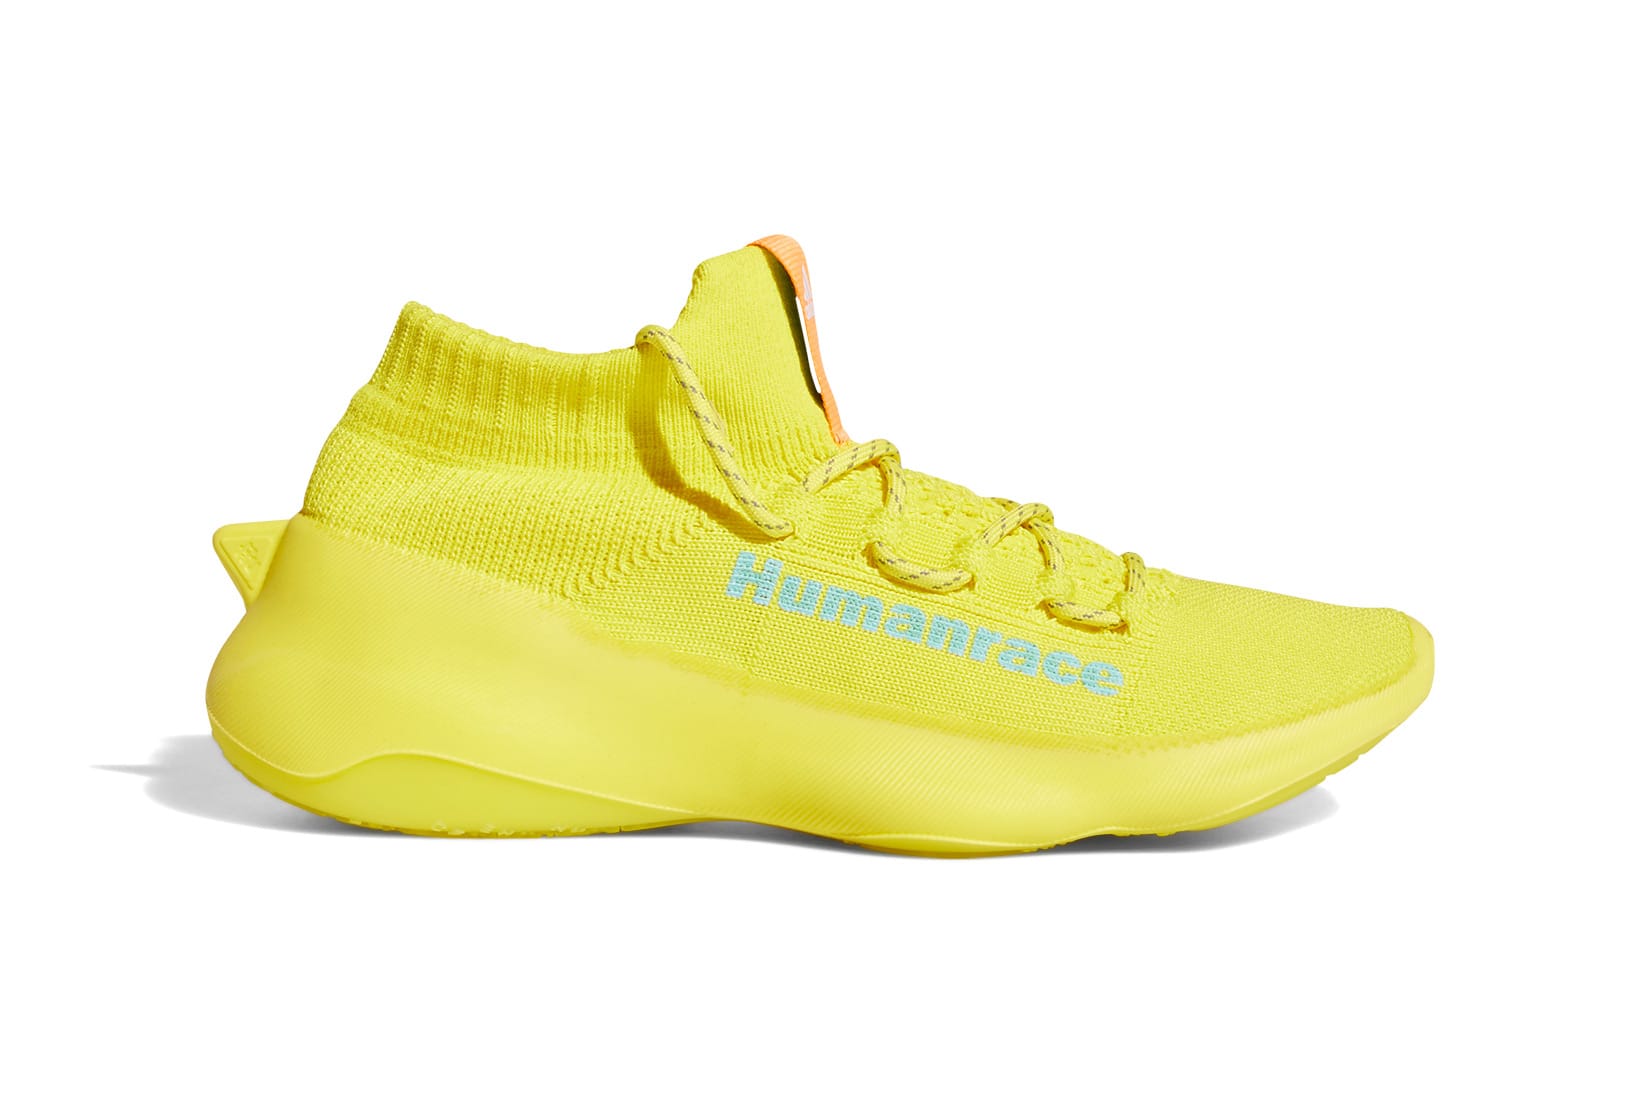 Neon Shoes and Clothes | adidas UK